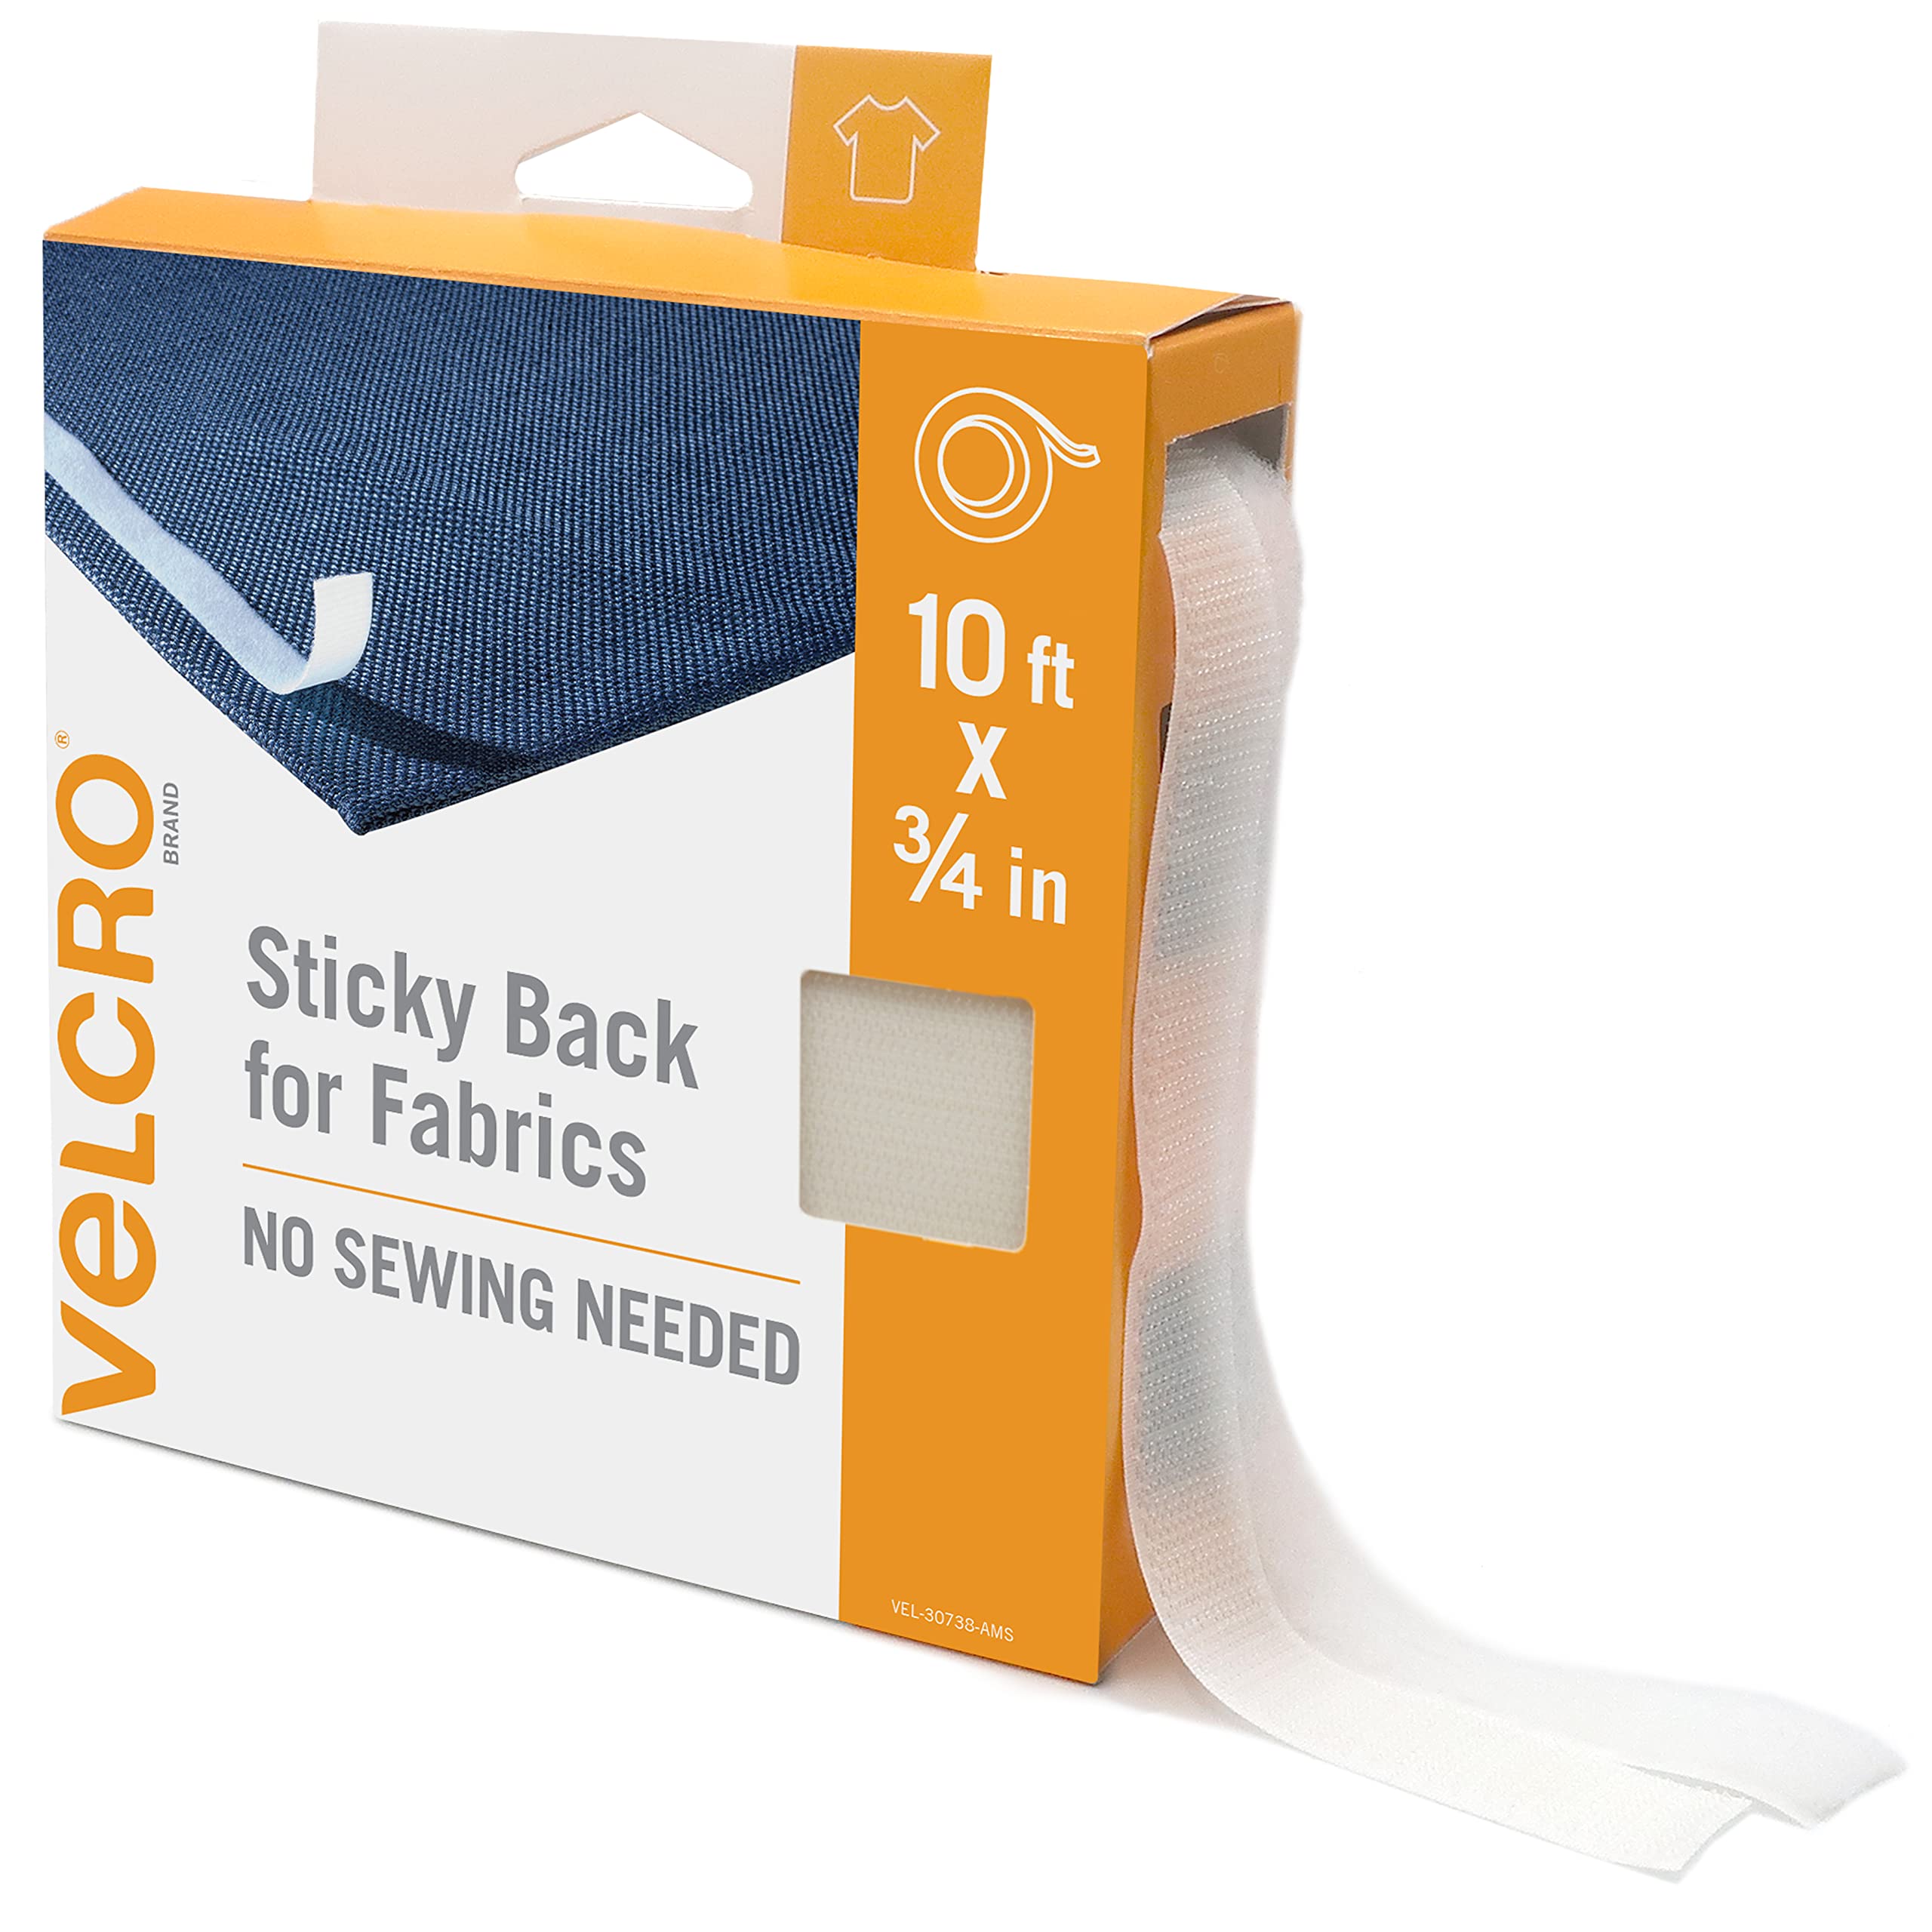 Velcro Brand Sticky Back for Fabrics 10 ft Bulk Roll No Sew Tape with Adhesive Cut Strips to Length Permanent Bond to Clothing for Hemming Replace